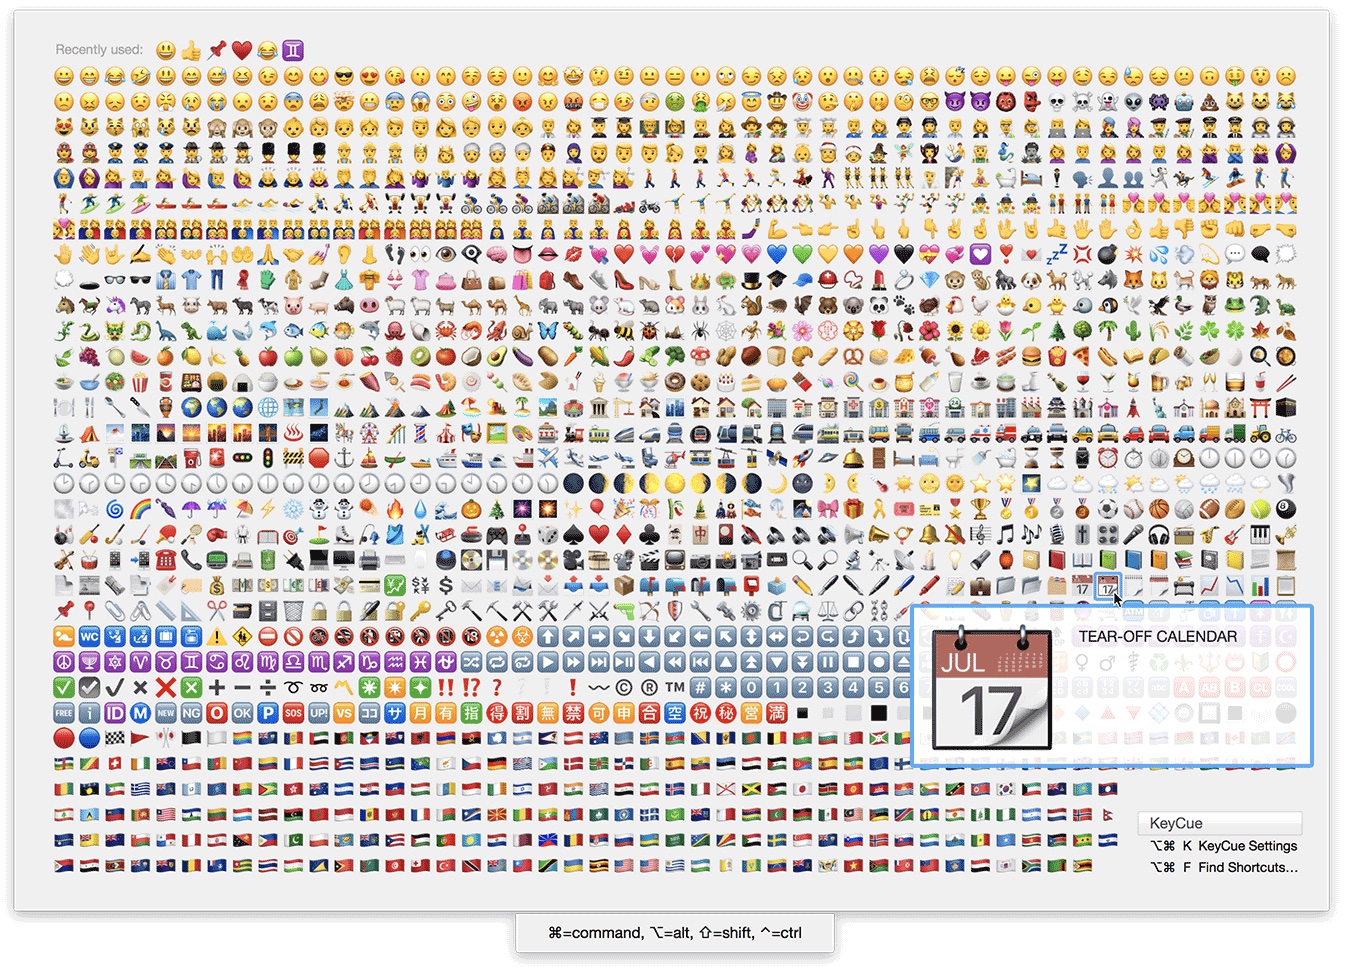 KeyQue 9 shows a table of available emoji characters